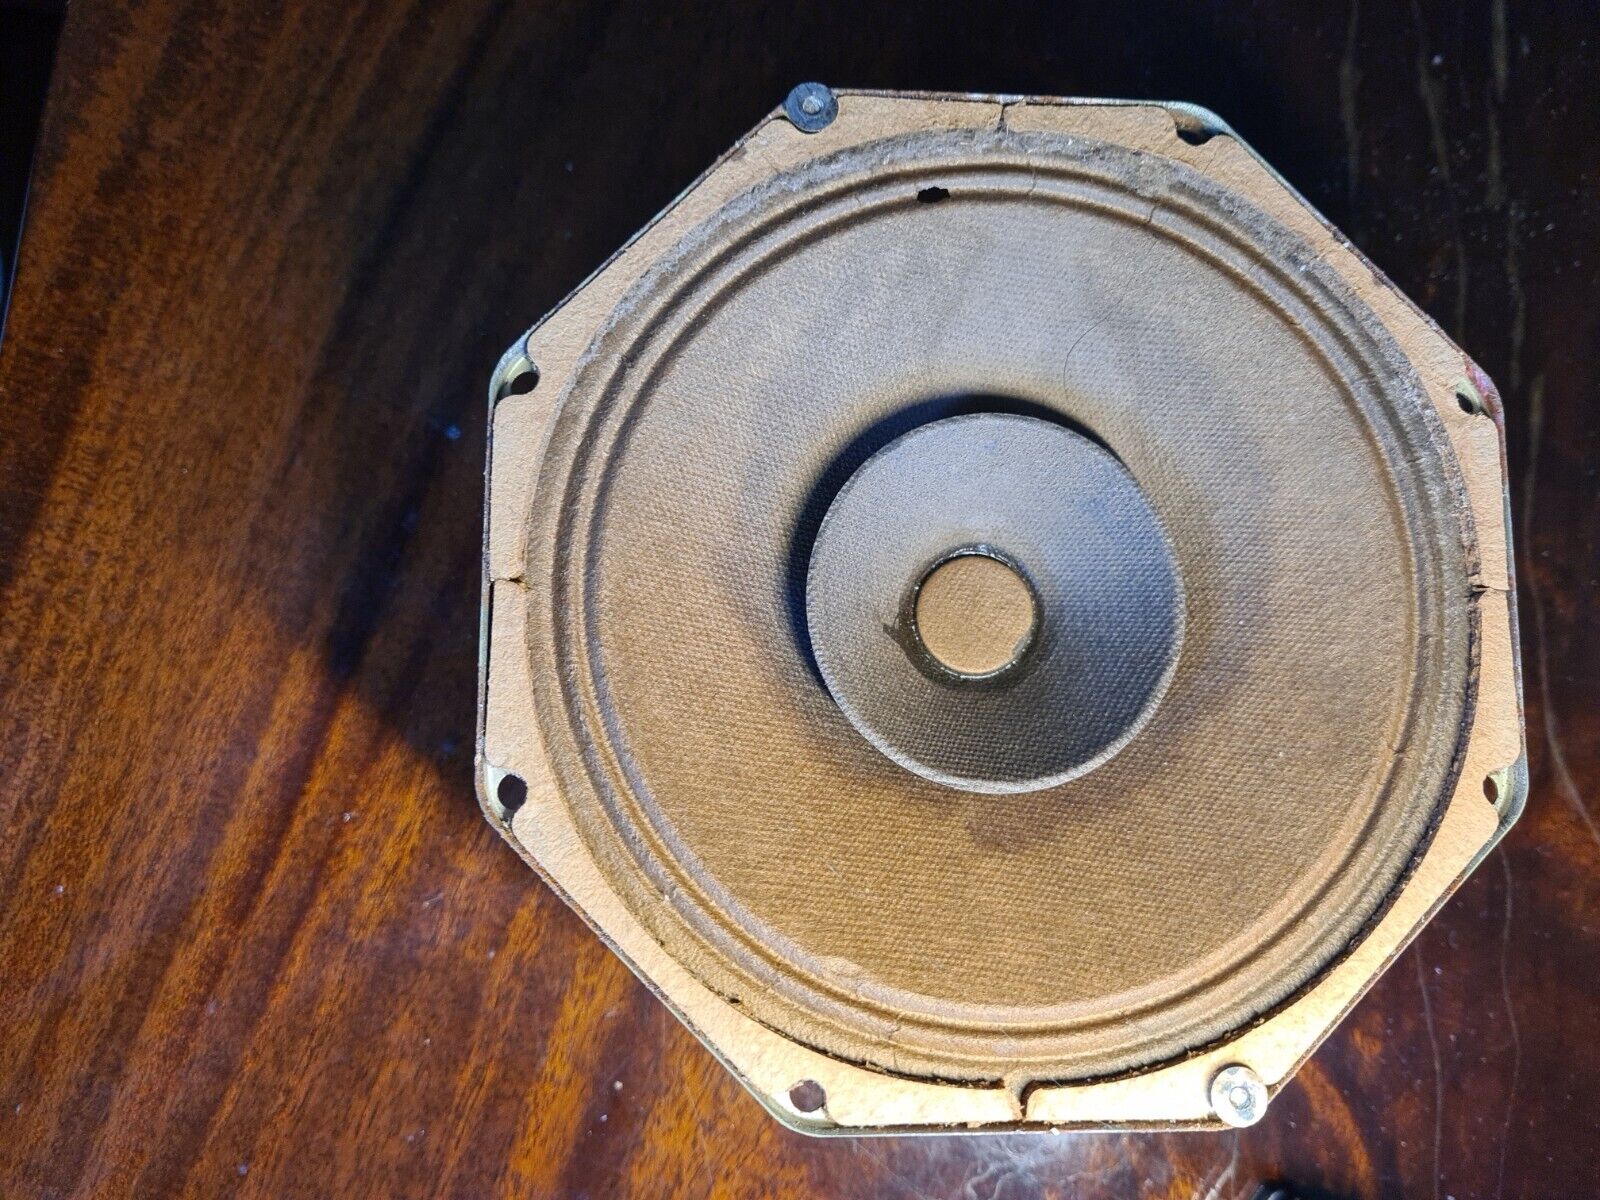 High impedance loudspeaker 633 ohm for repair vintage radios or other equipment.